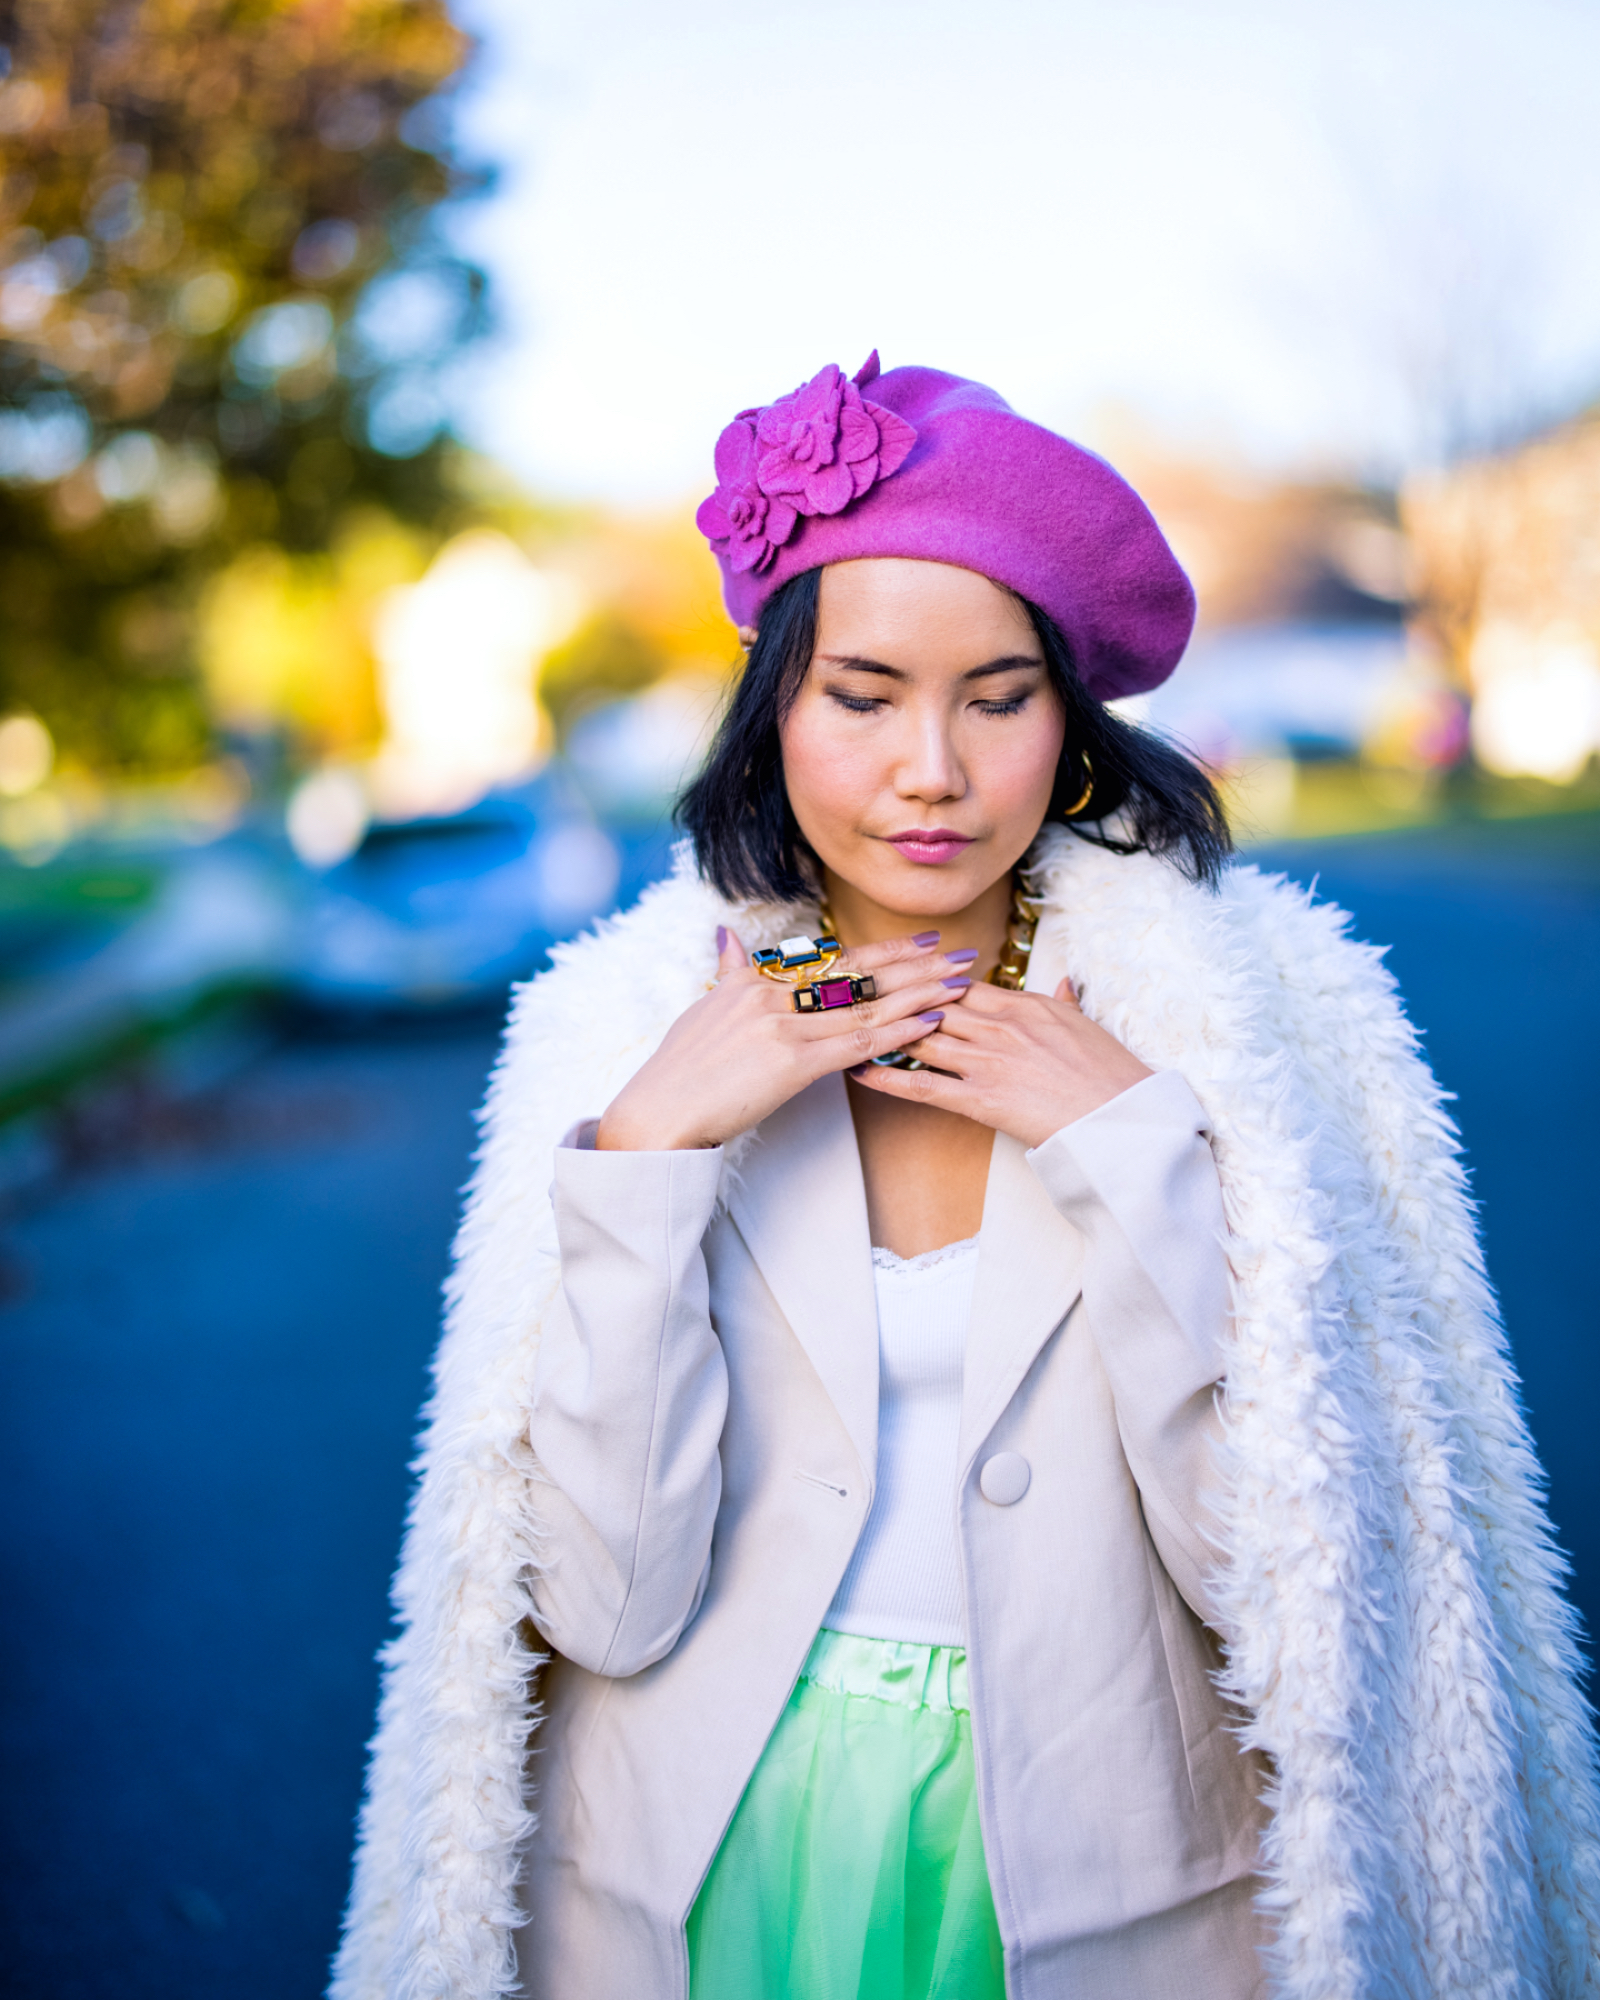 nanphanita is wearing a must have cold accessory beret from san diego hat company